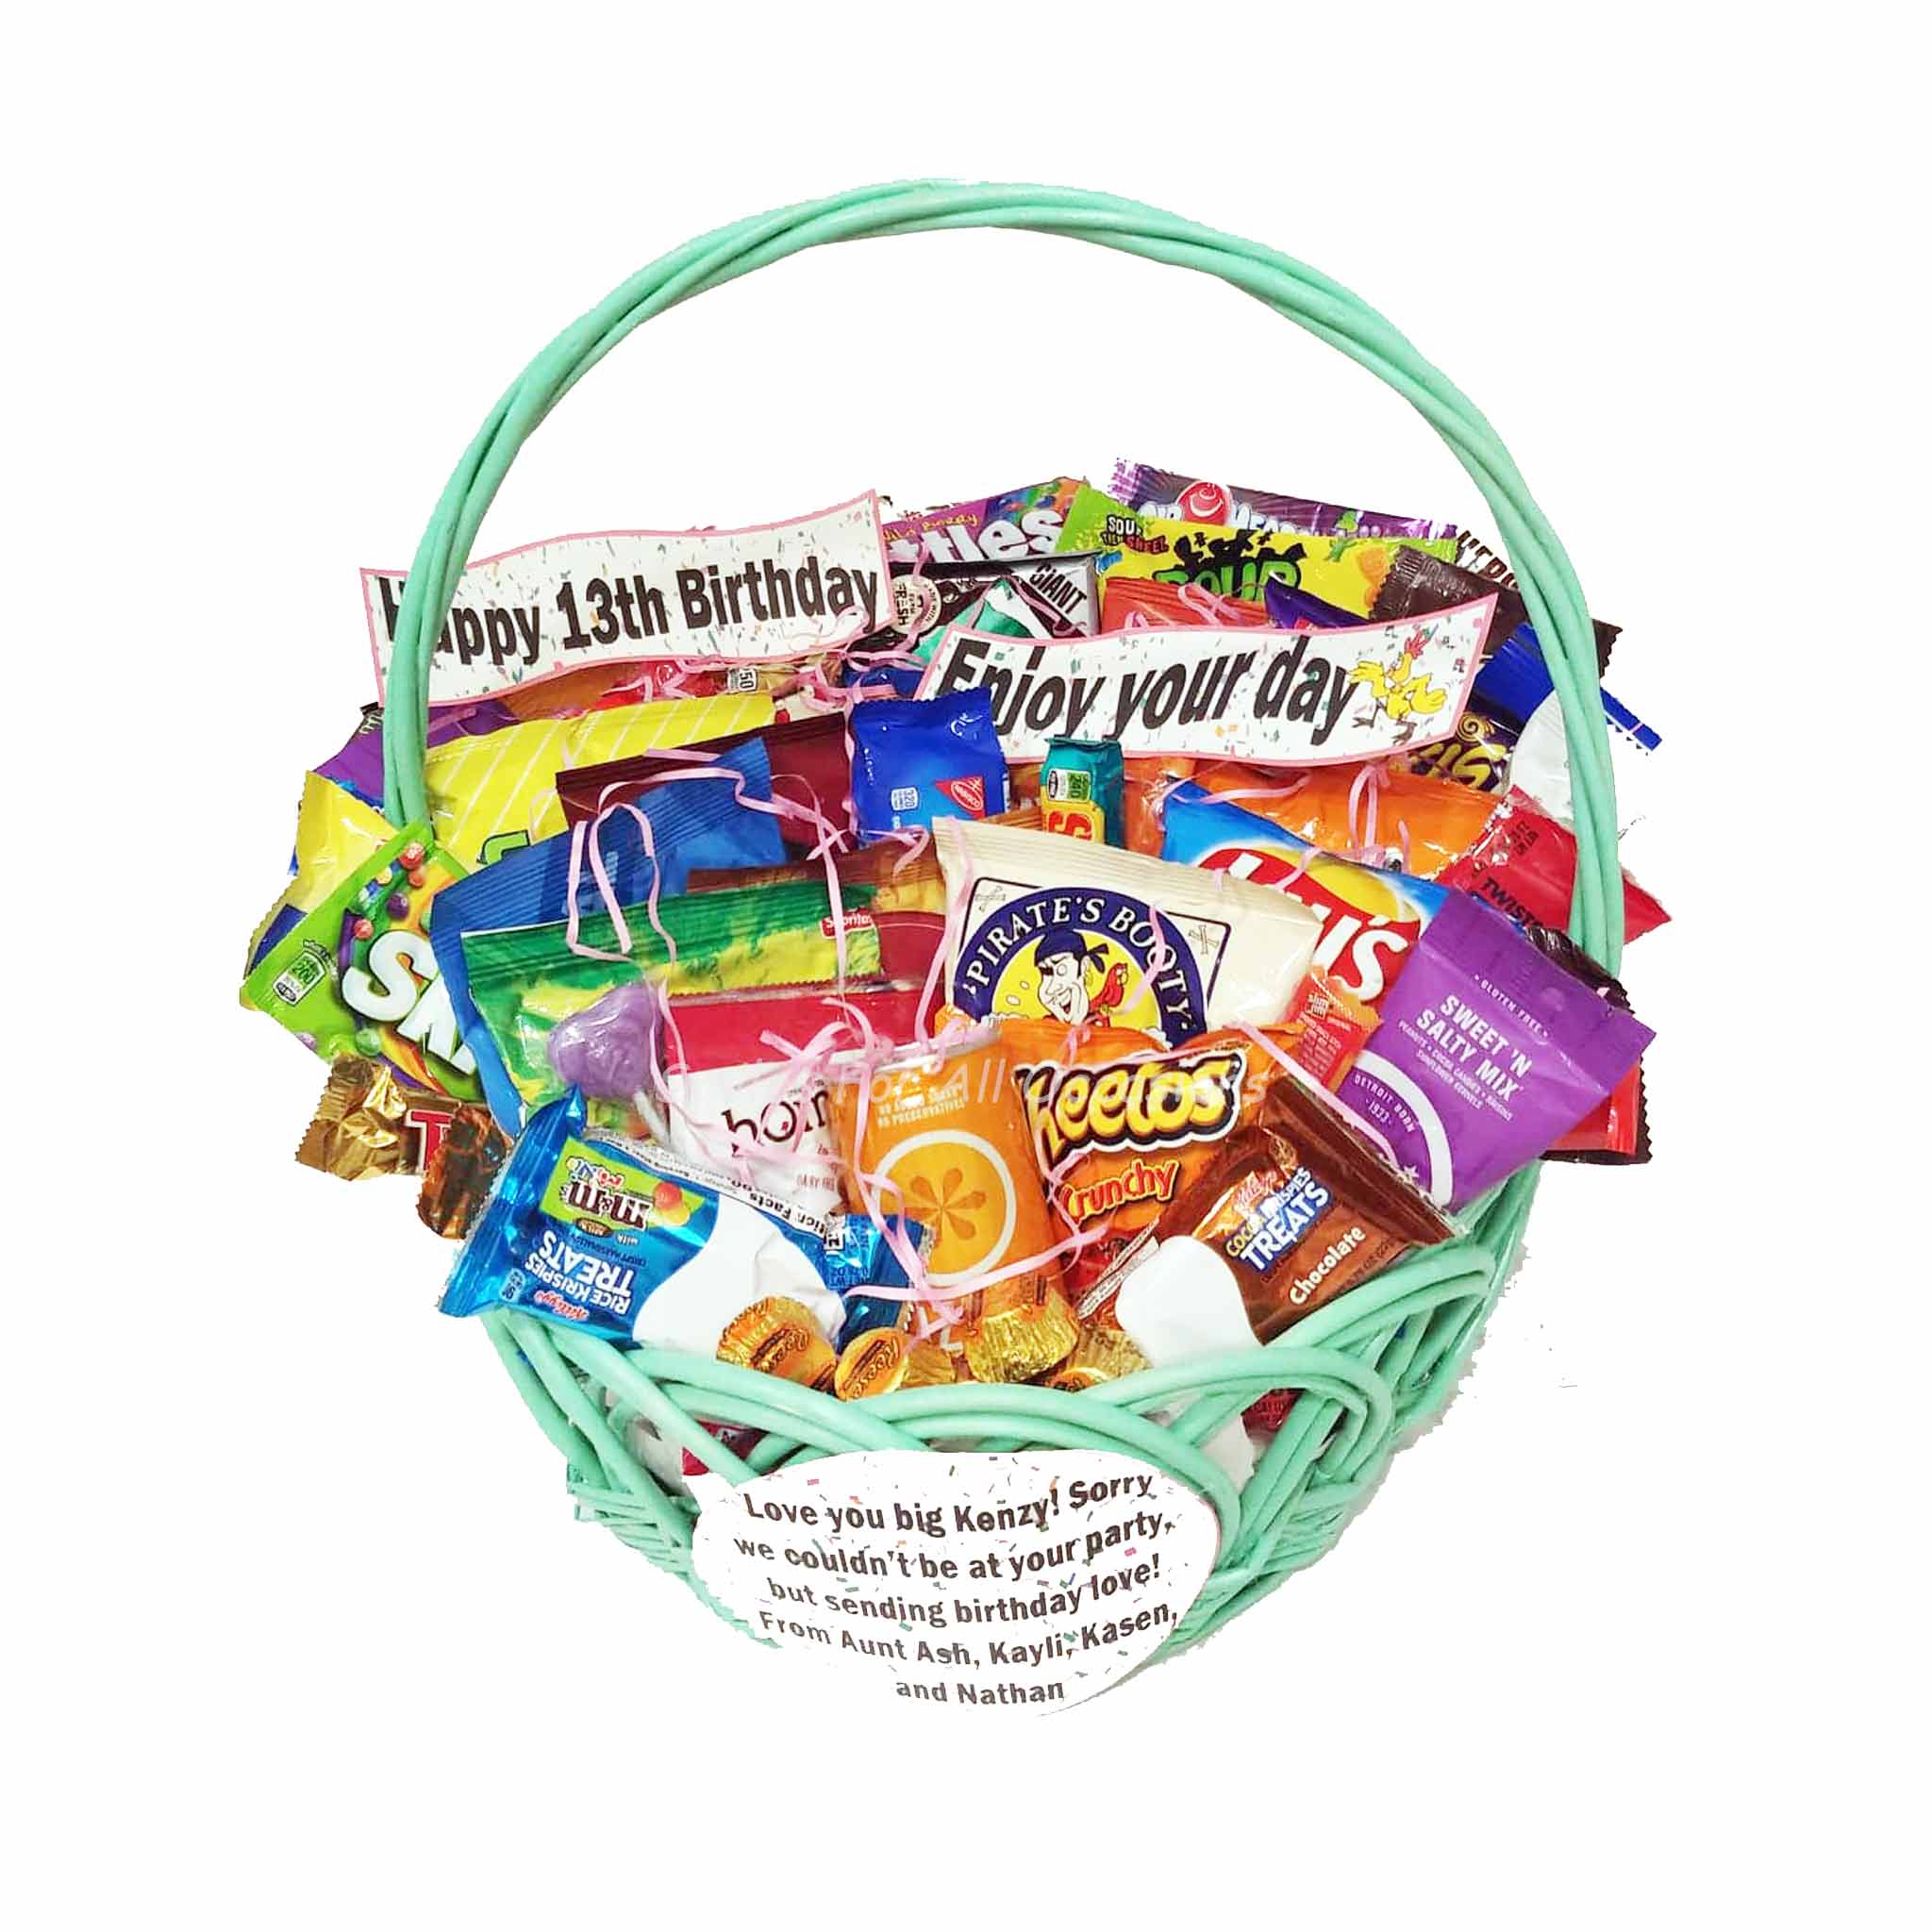 Snack Gift Baskets: Unique Ideas for the Perfect Gift - Paper del Sol